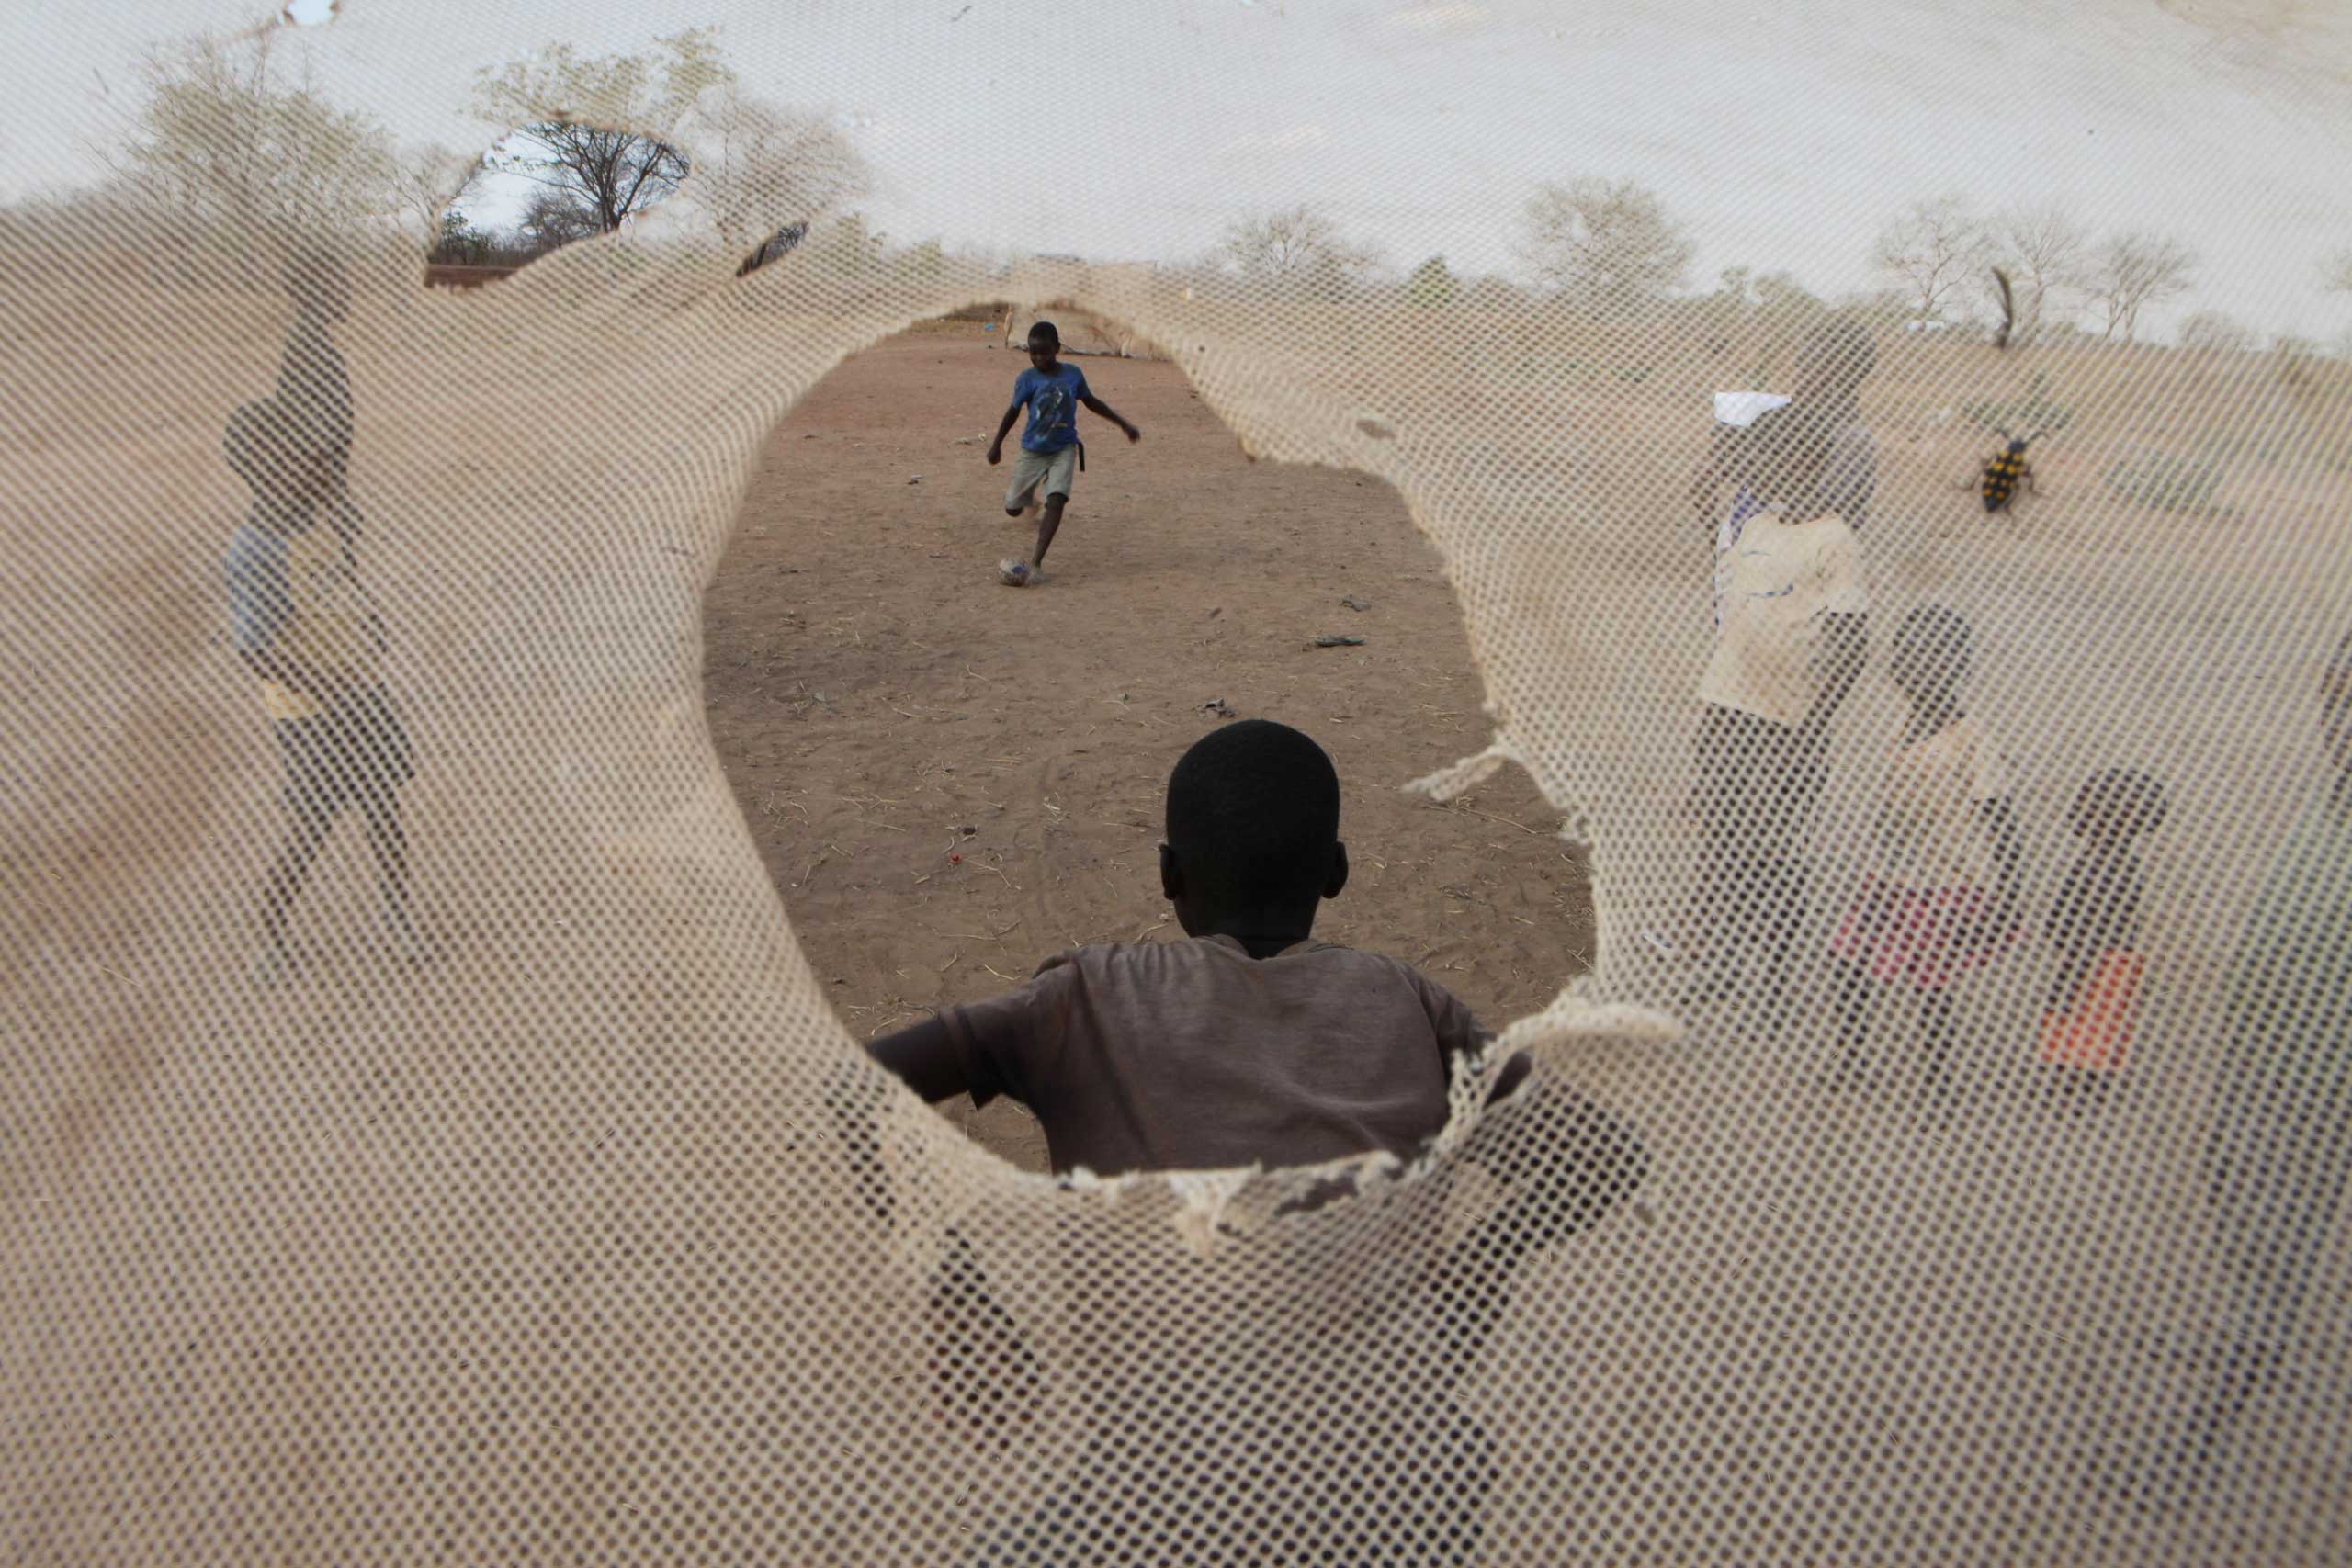 Nov, 10, 2014. Children are seen through a mosquito net used as  goal post net on the outskirts of  Lusaka, Zambia.